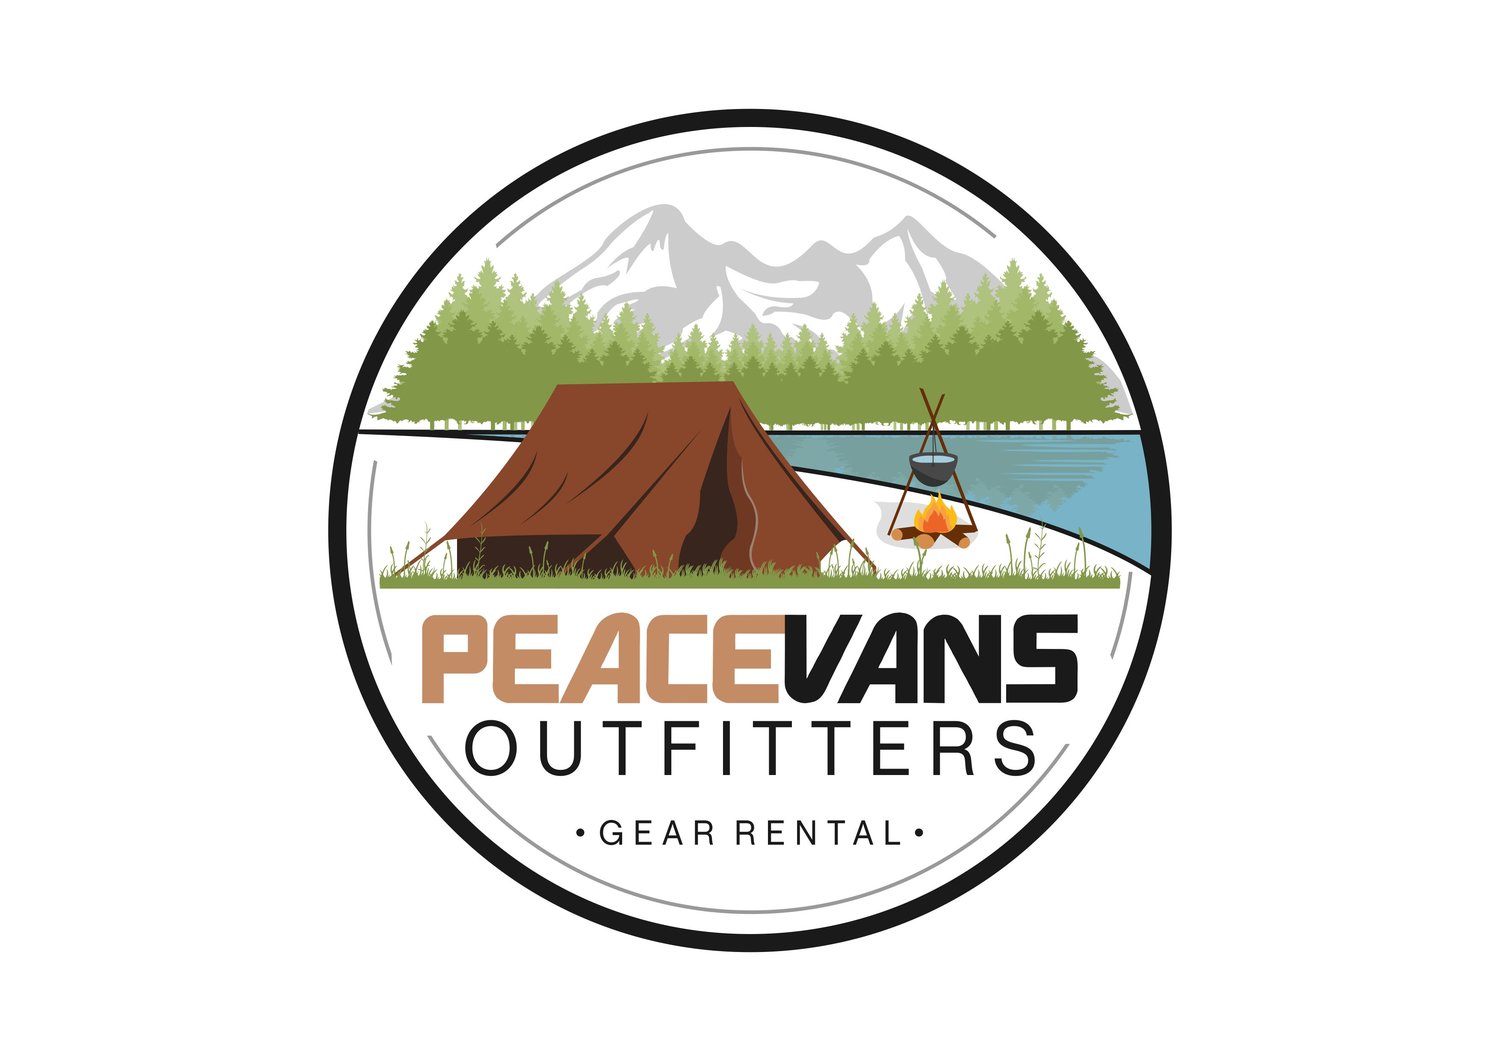 Peace Vans Outfitters: Gear Rental